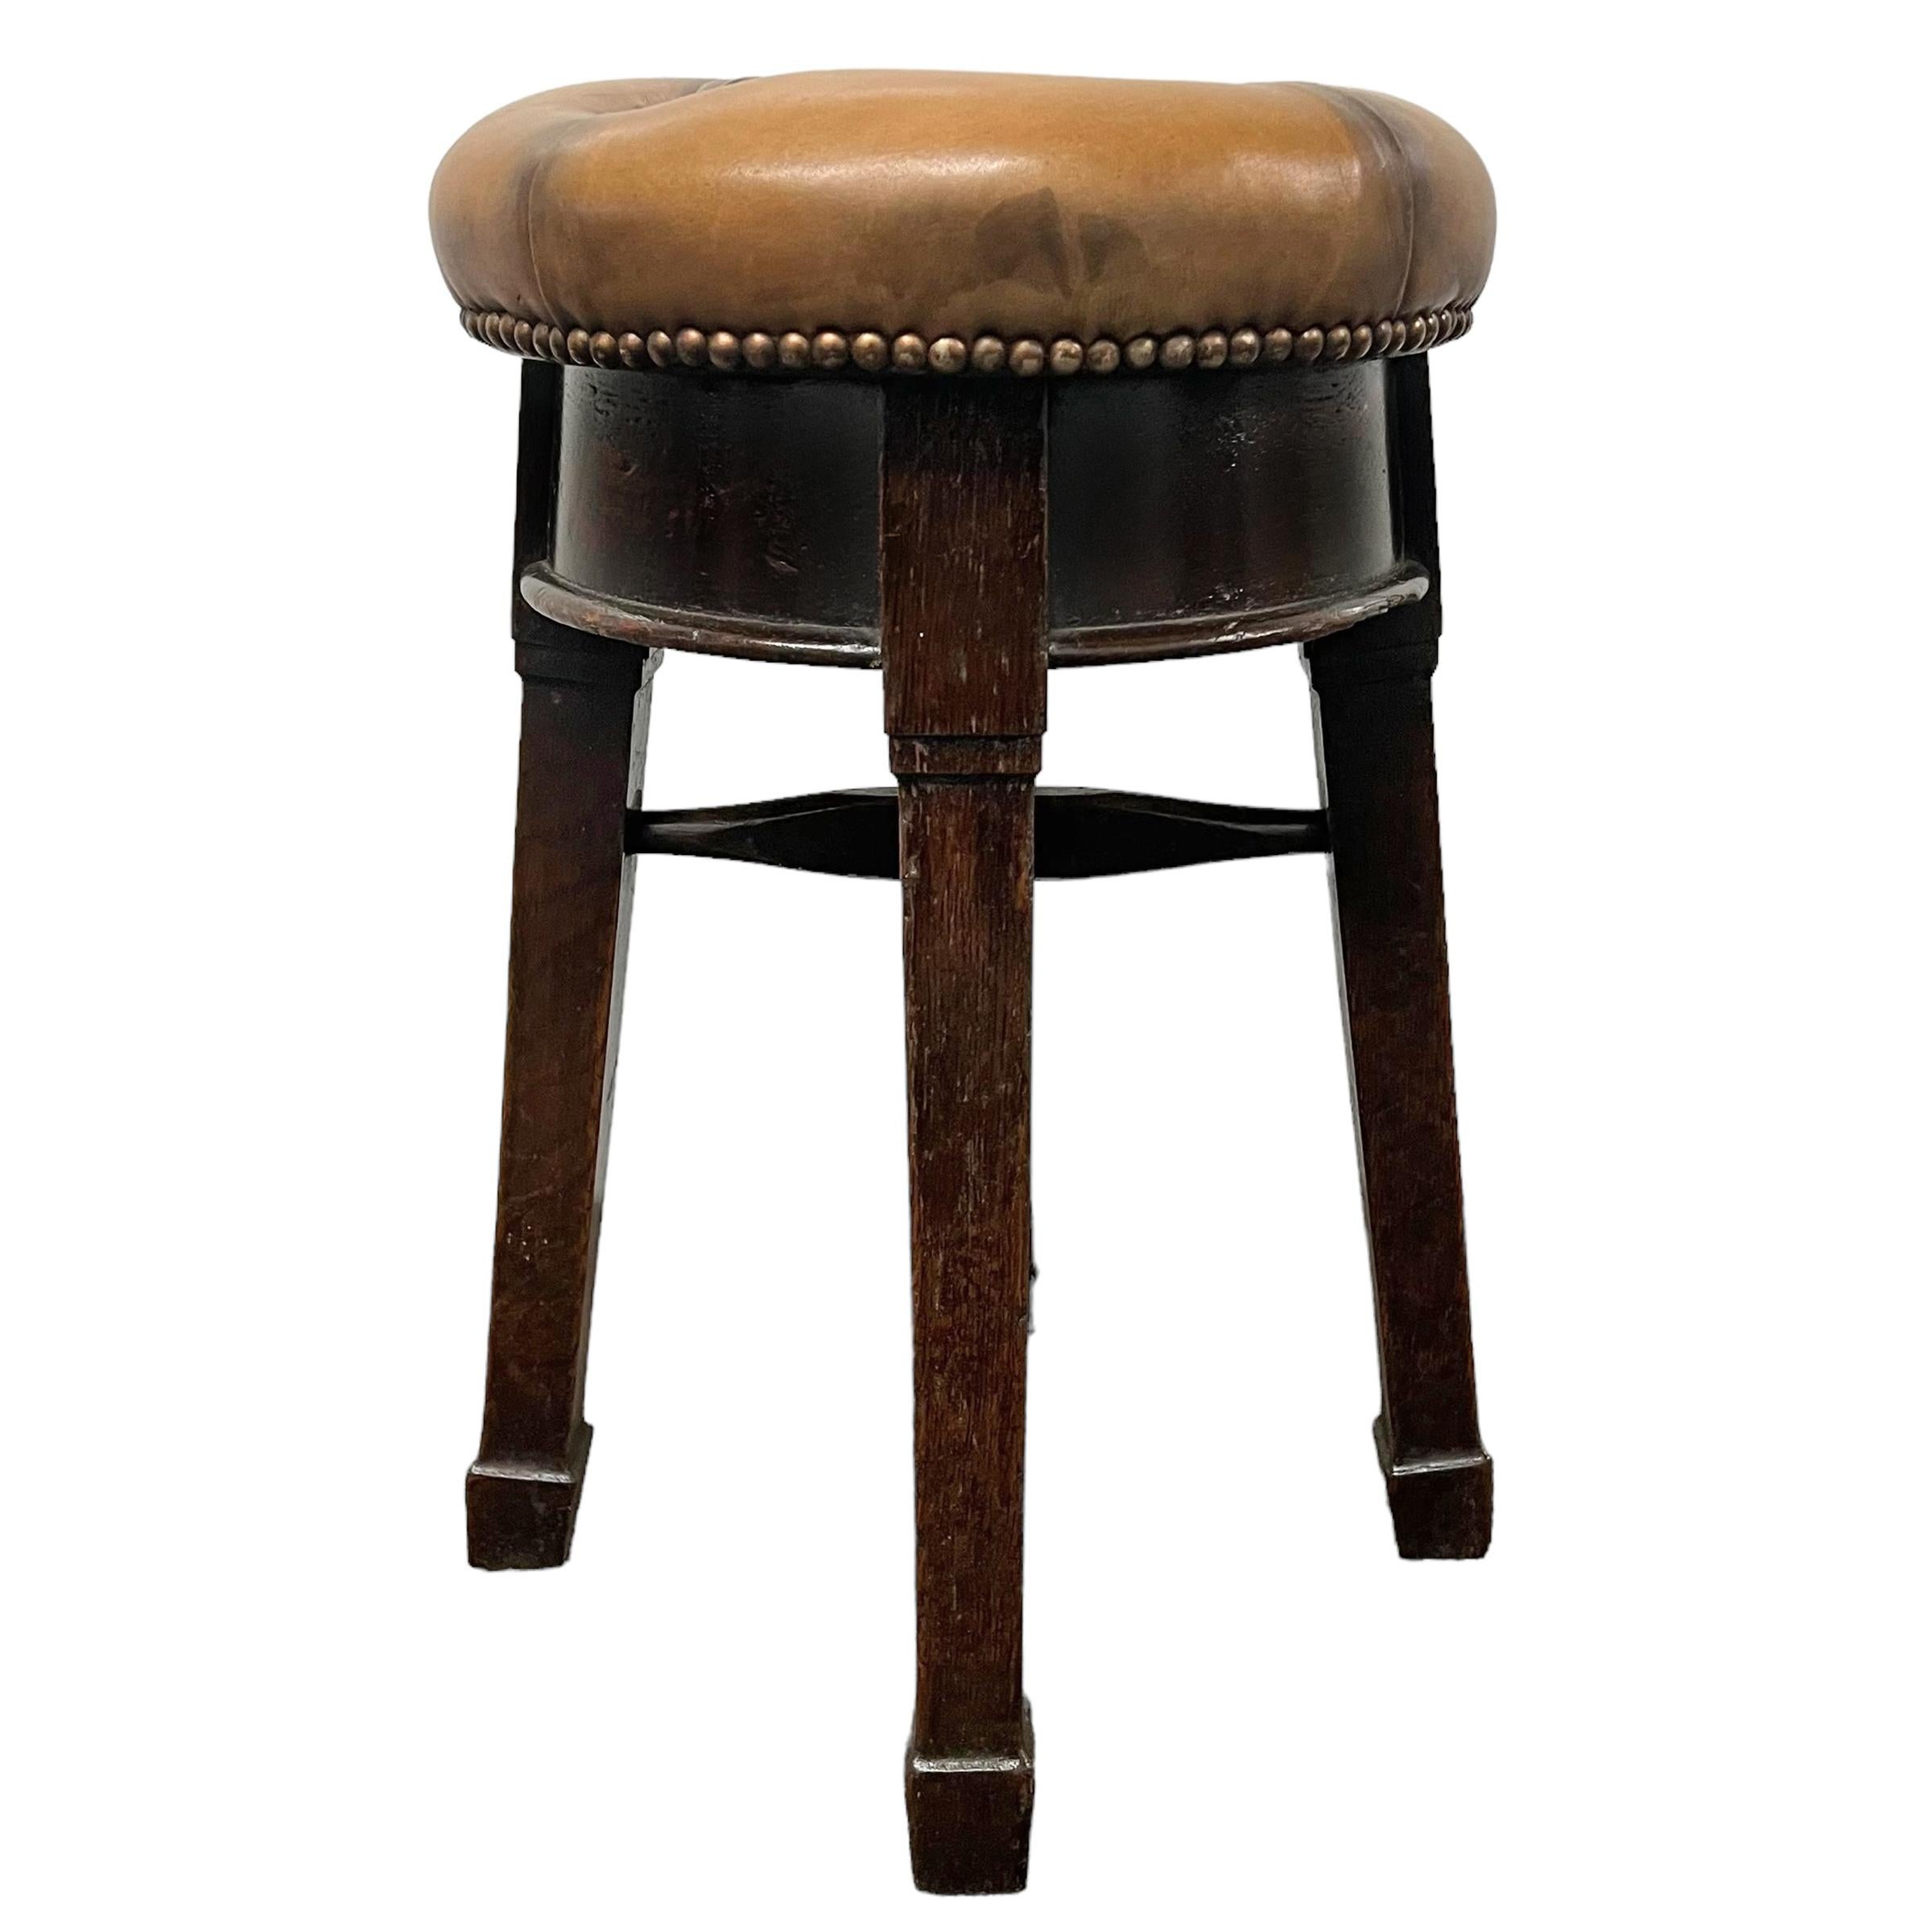 Set of Three 19th Century English Pub Stools In Good Condition For Sale In Chicago, IL